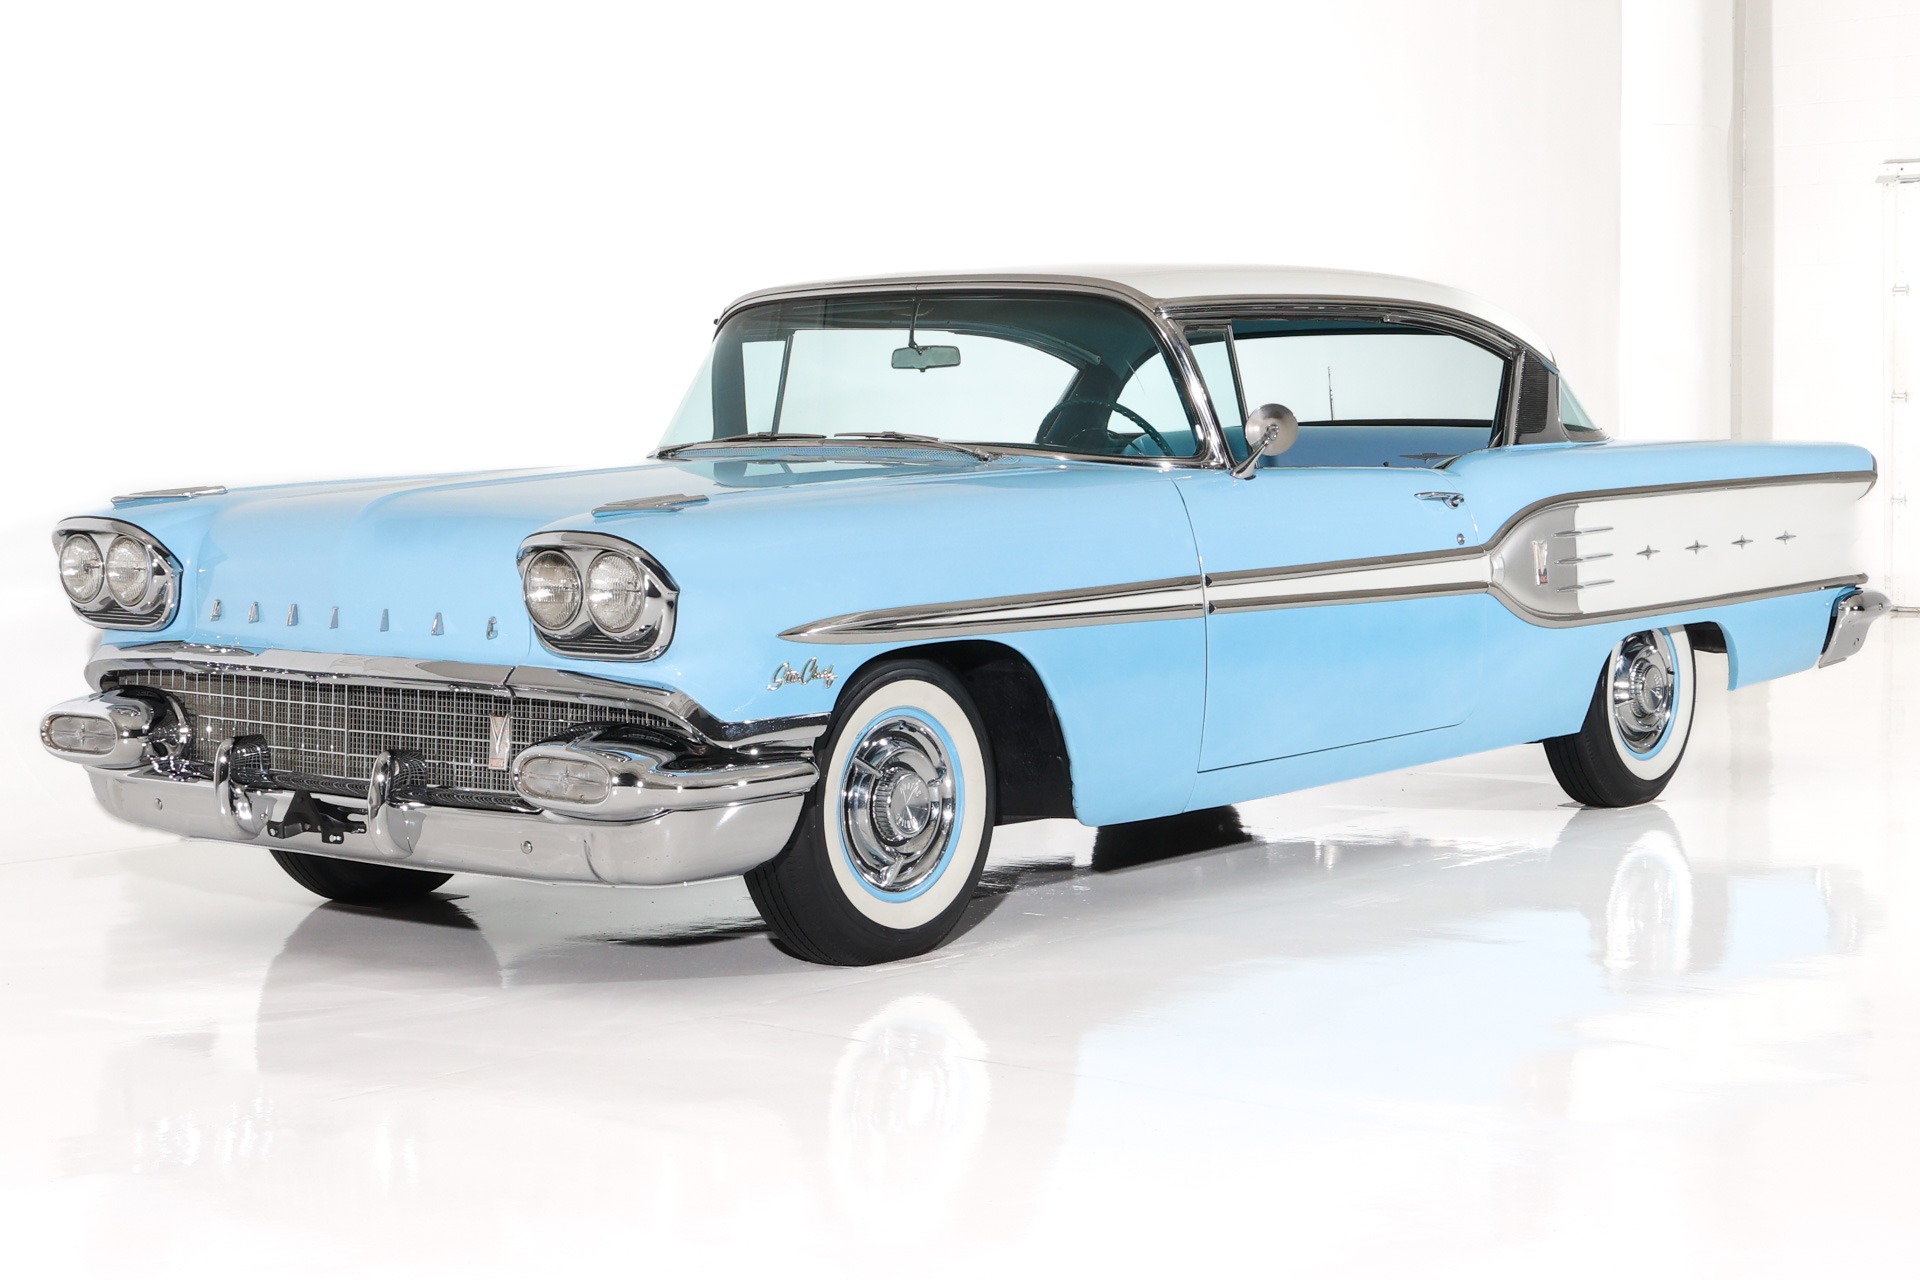 For Sale Used 1958 Pontiac Star Chief Time Capsule 370 Auto PS PB | American Dream Machines Des Moines IA 50309